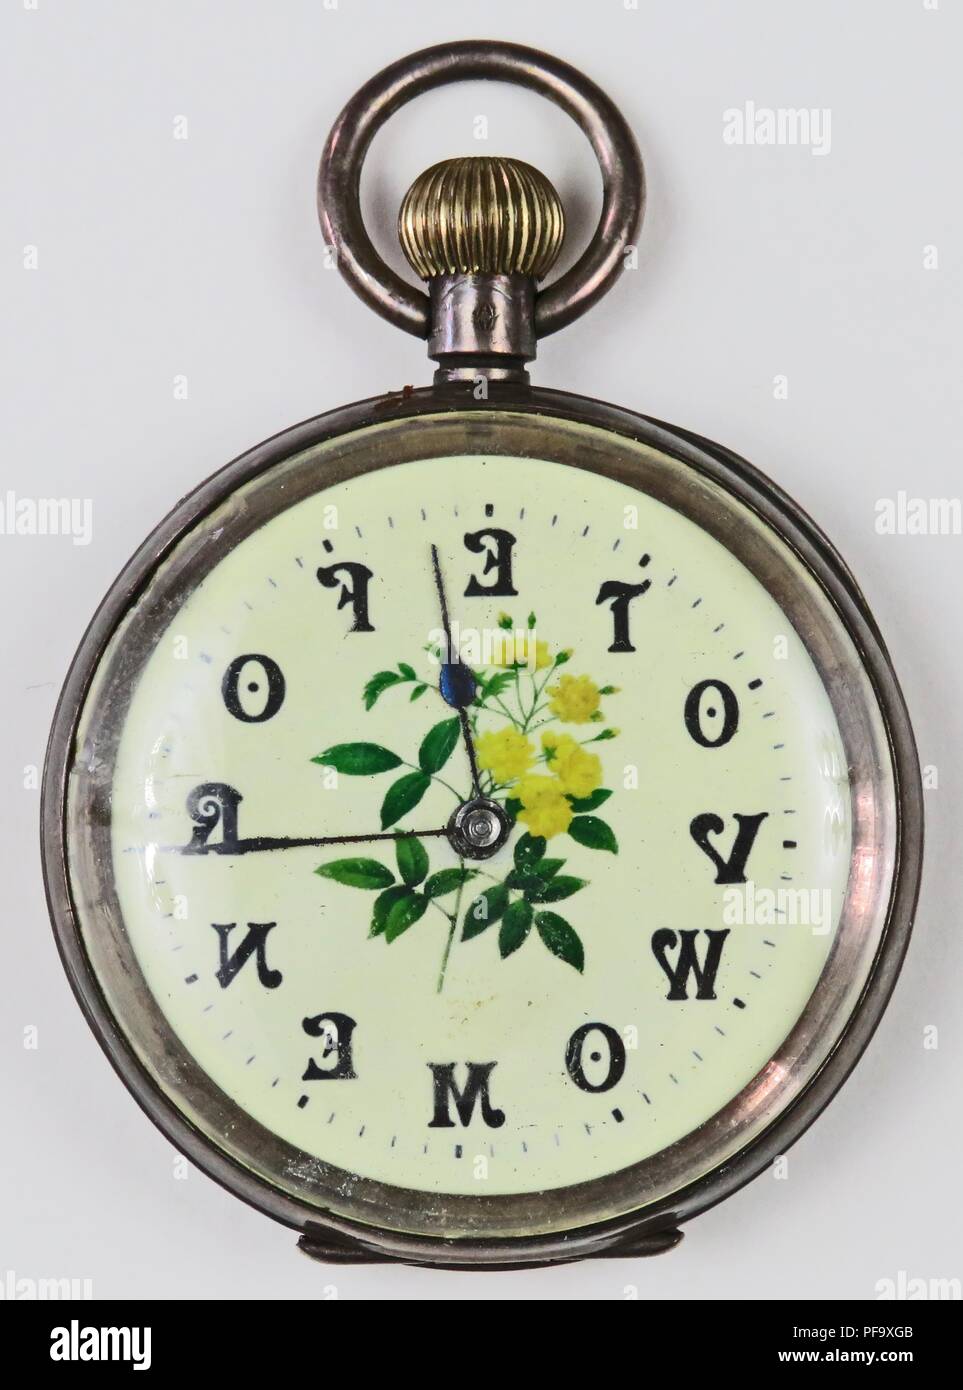 Silver-colored, pro-suffrage pocket watch or fob watch, with the phrase 'Vote for Women,  with each letter corresponding to a numeral, and a yellow and green rose on the enamel face, 1900. Photography by Emilia van Beugen. () Stock Photo